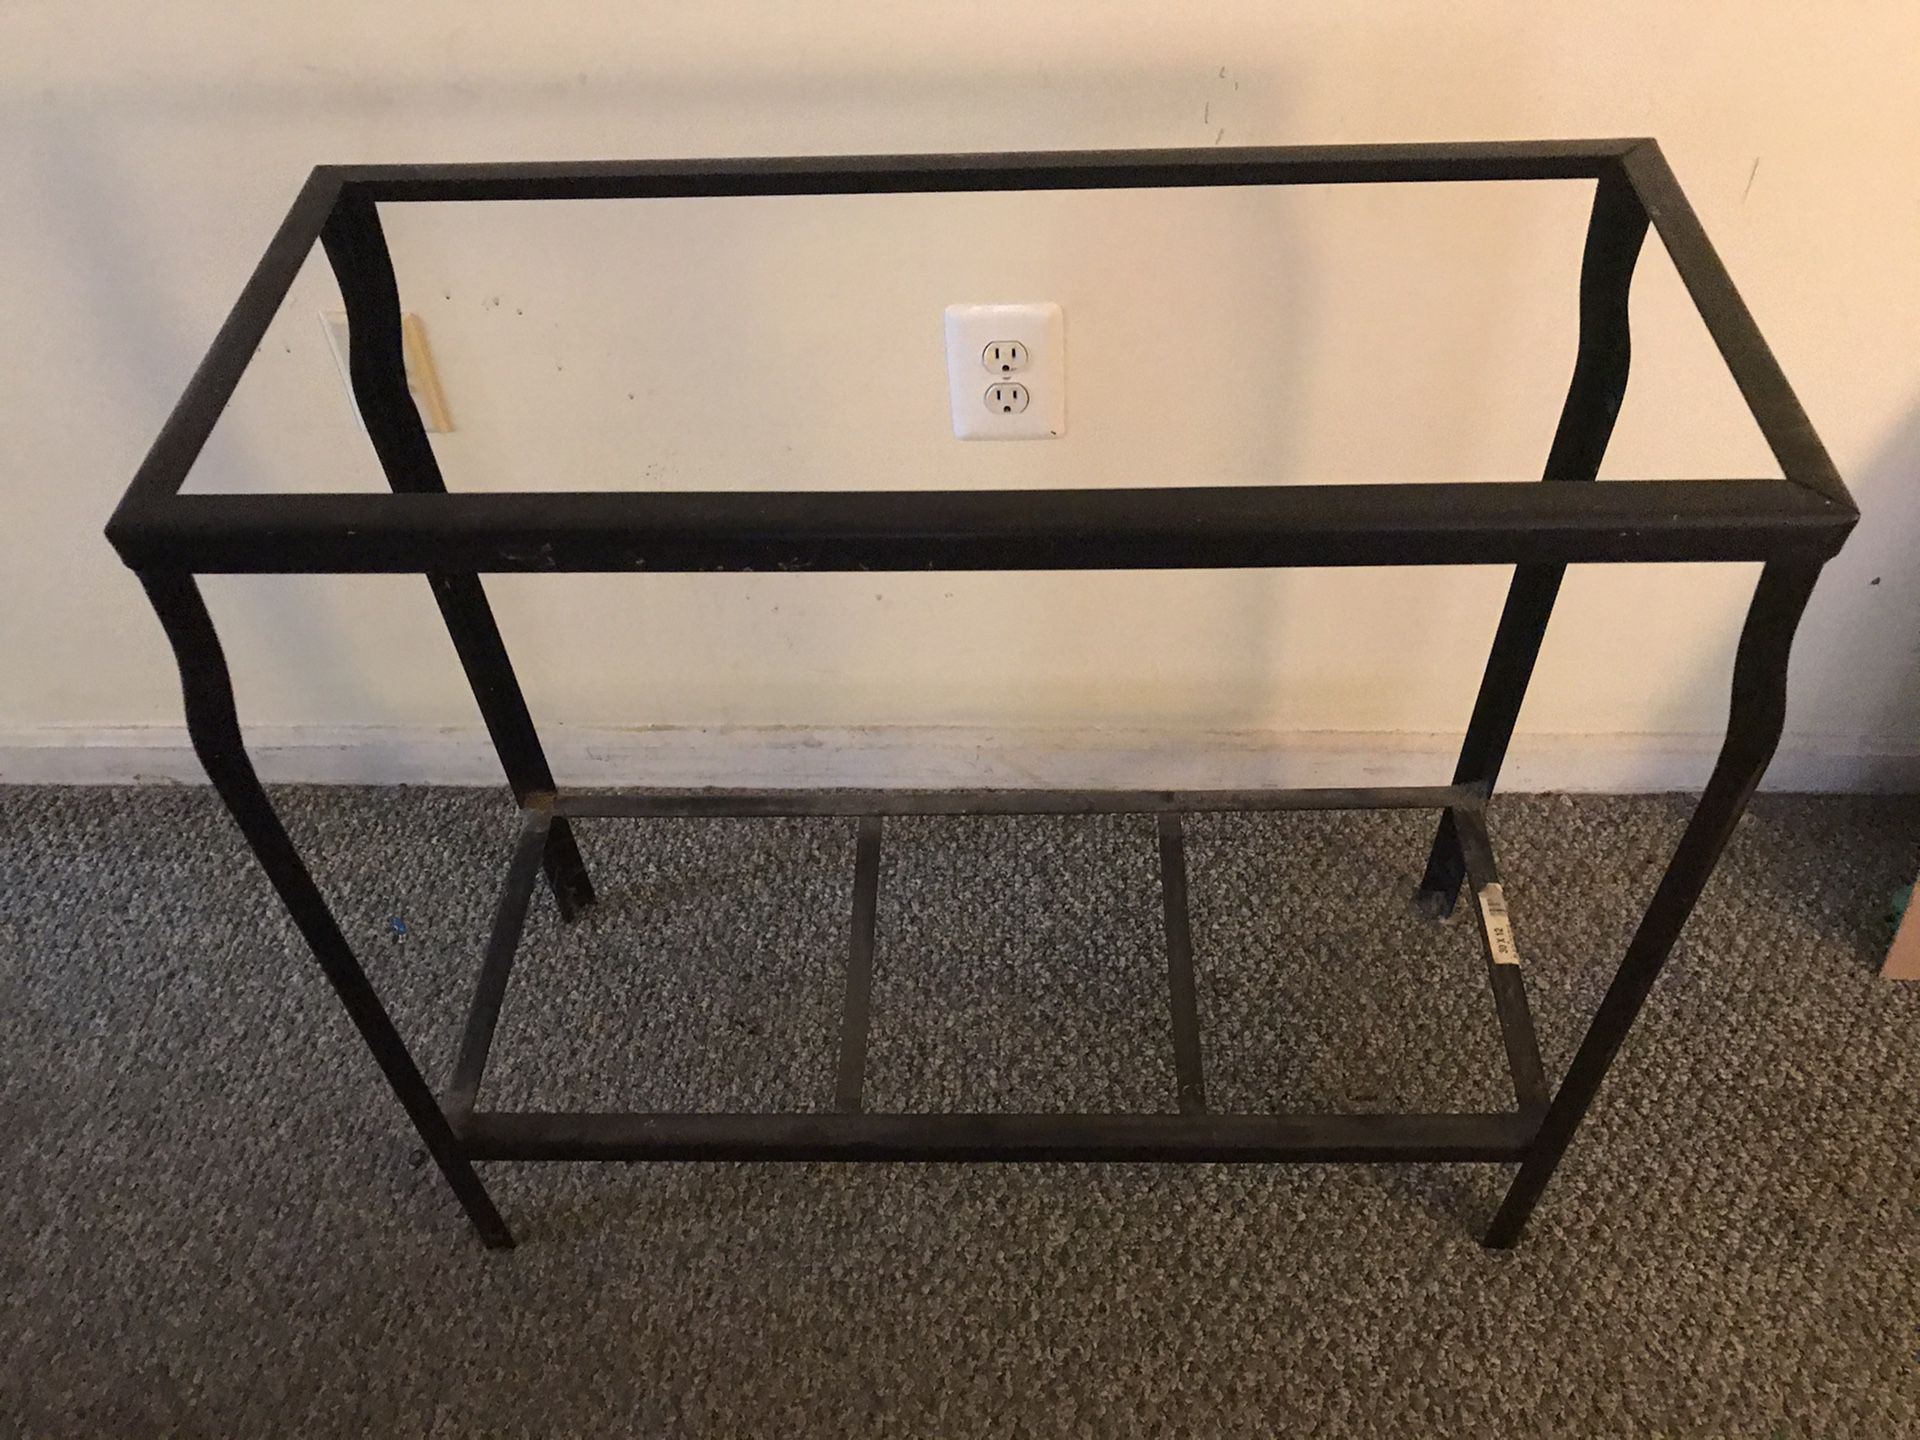 30x12 black double iron fish stand